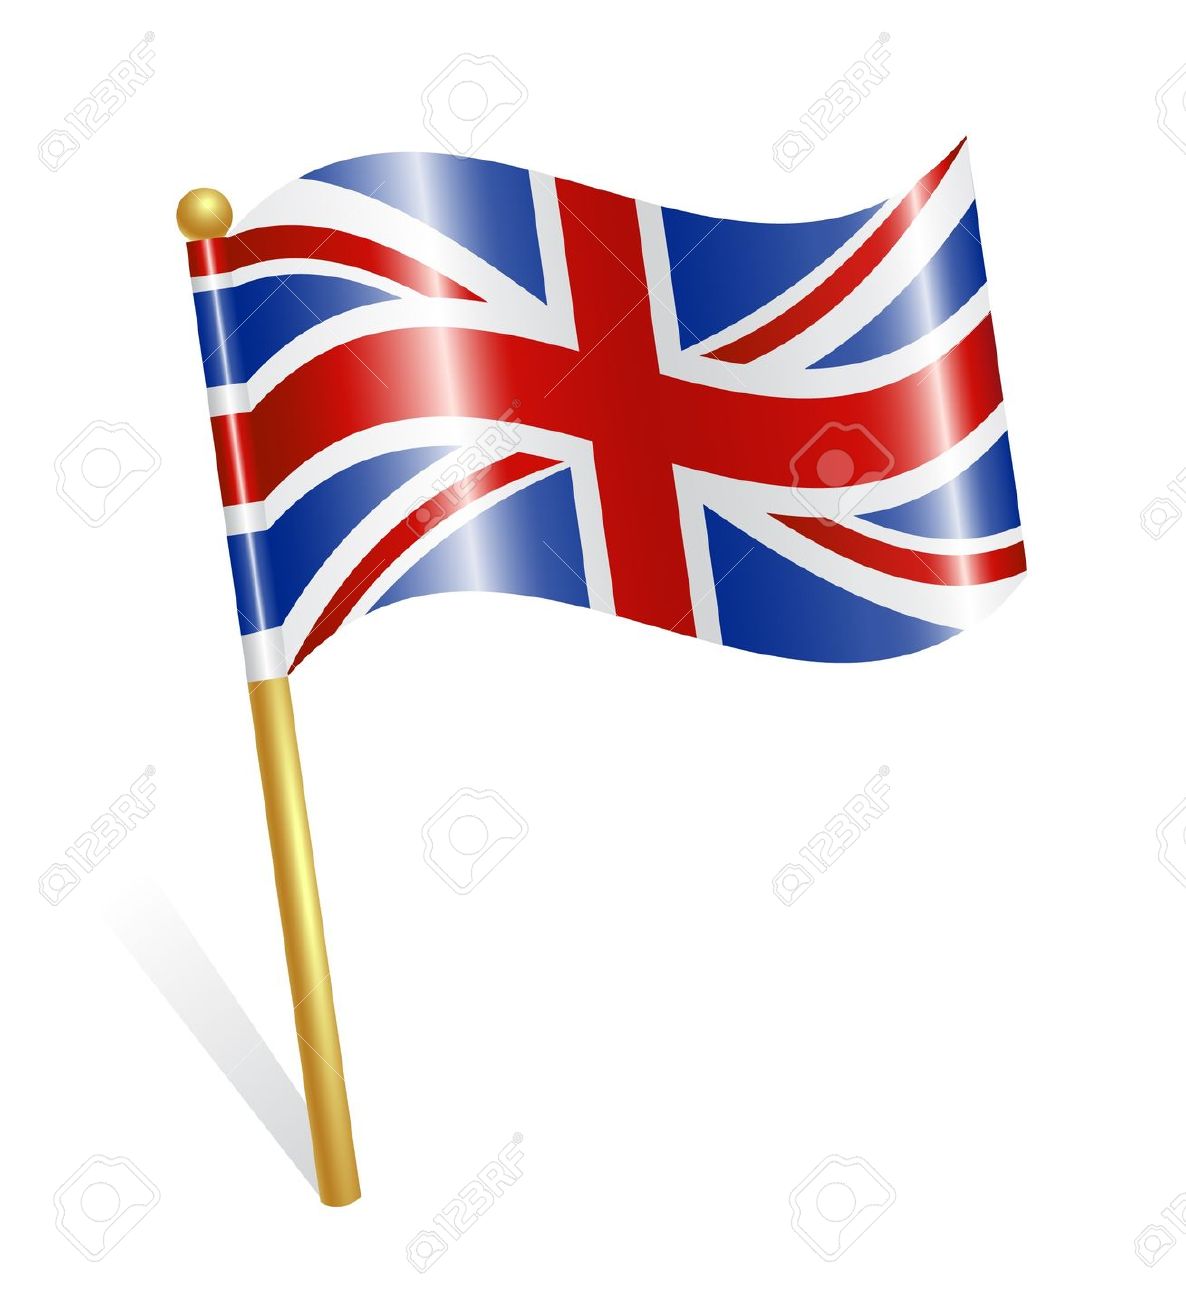 clip art flags flying - photo #10